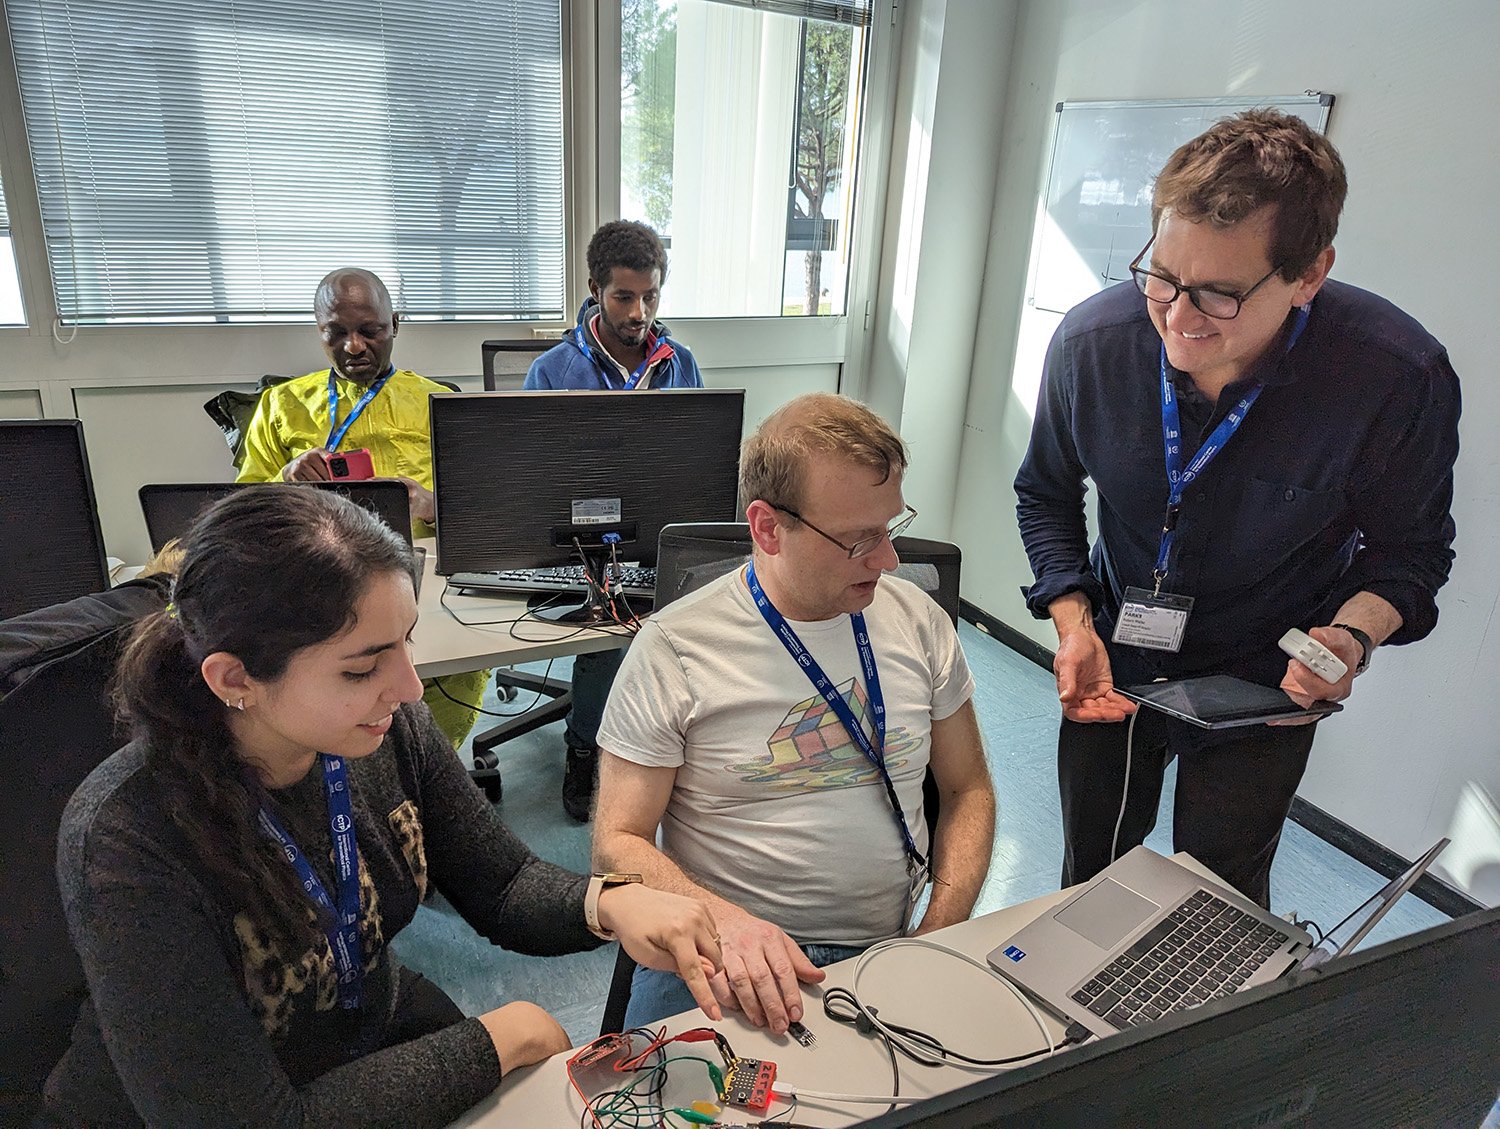  Robert Parks (right) helps workshop participants troubleshoot a heart-rate sensor that supplies data to a prototype health app. 